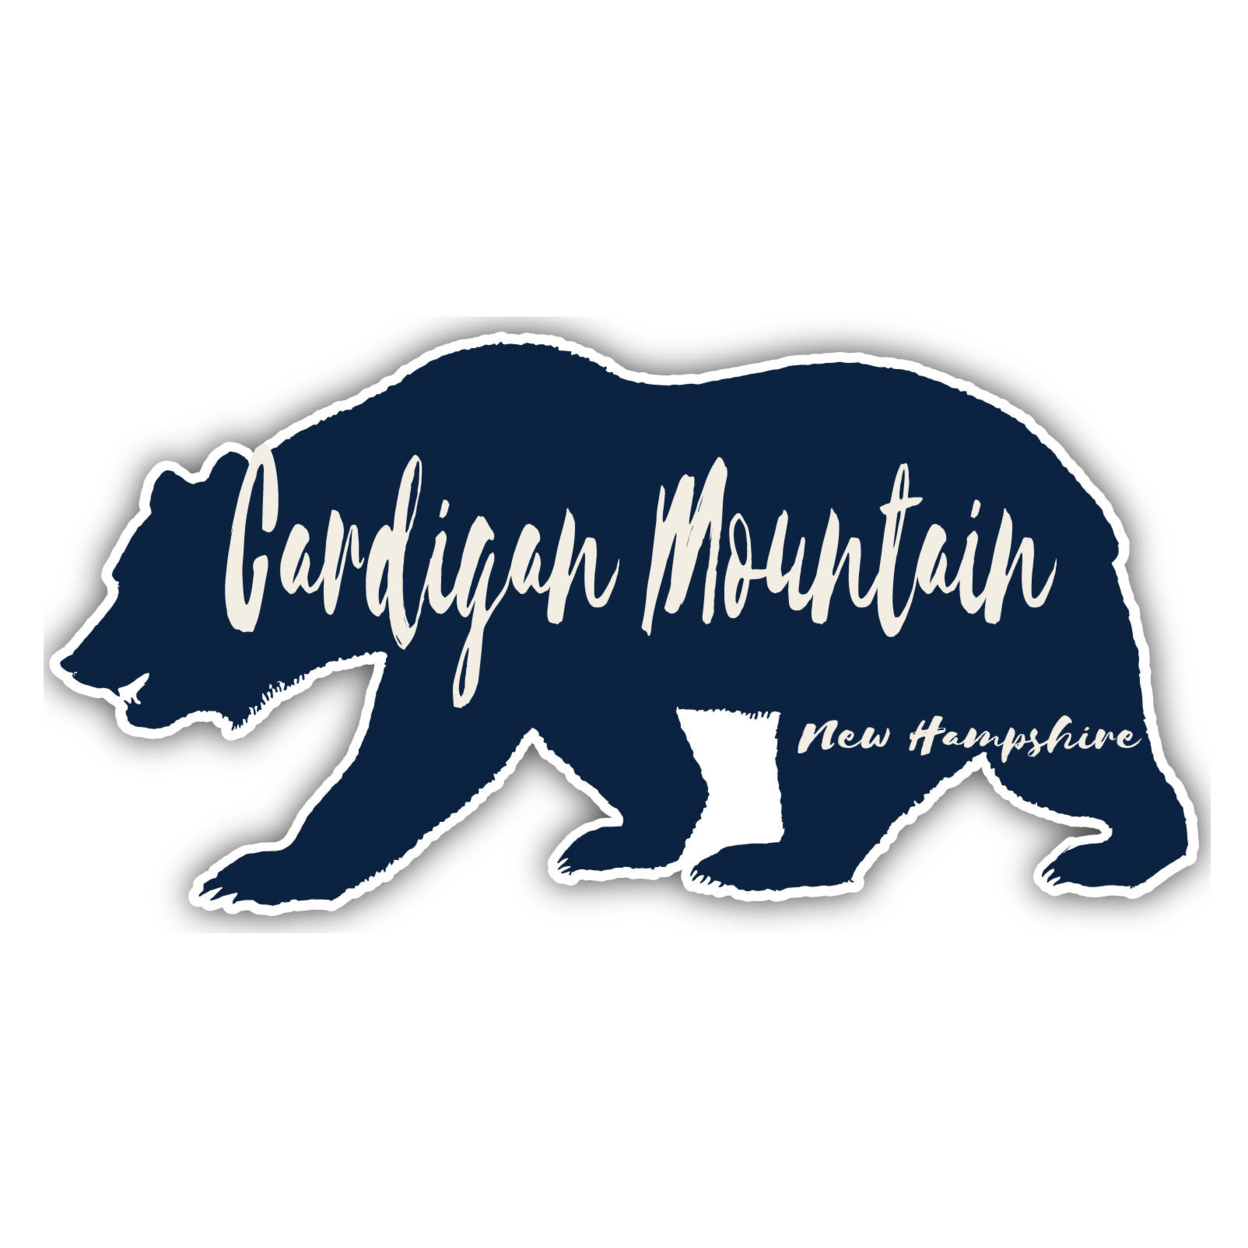 Cardigan Mountain New Hampshire Souvenir Decorative Stickers (Choose Theme And Size) - 4-Pack, 10-Inch, Bear